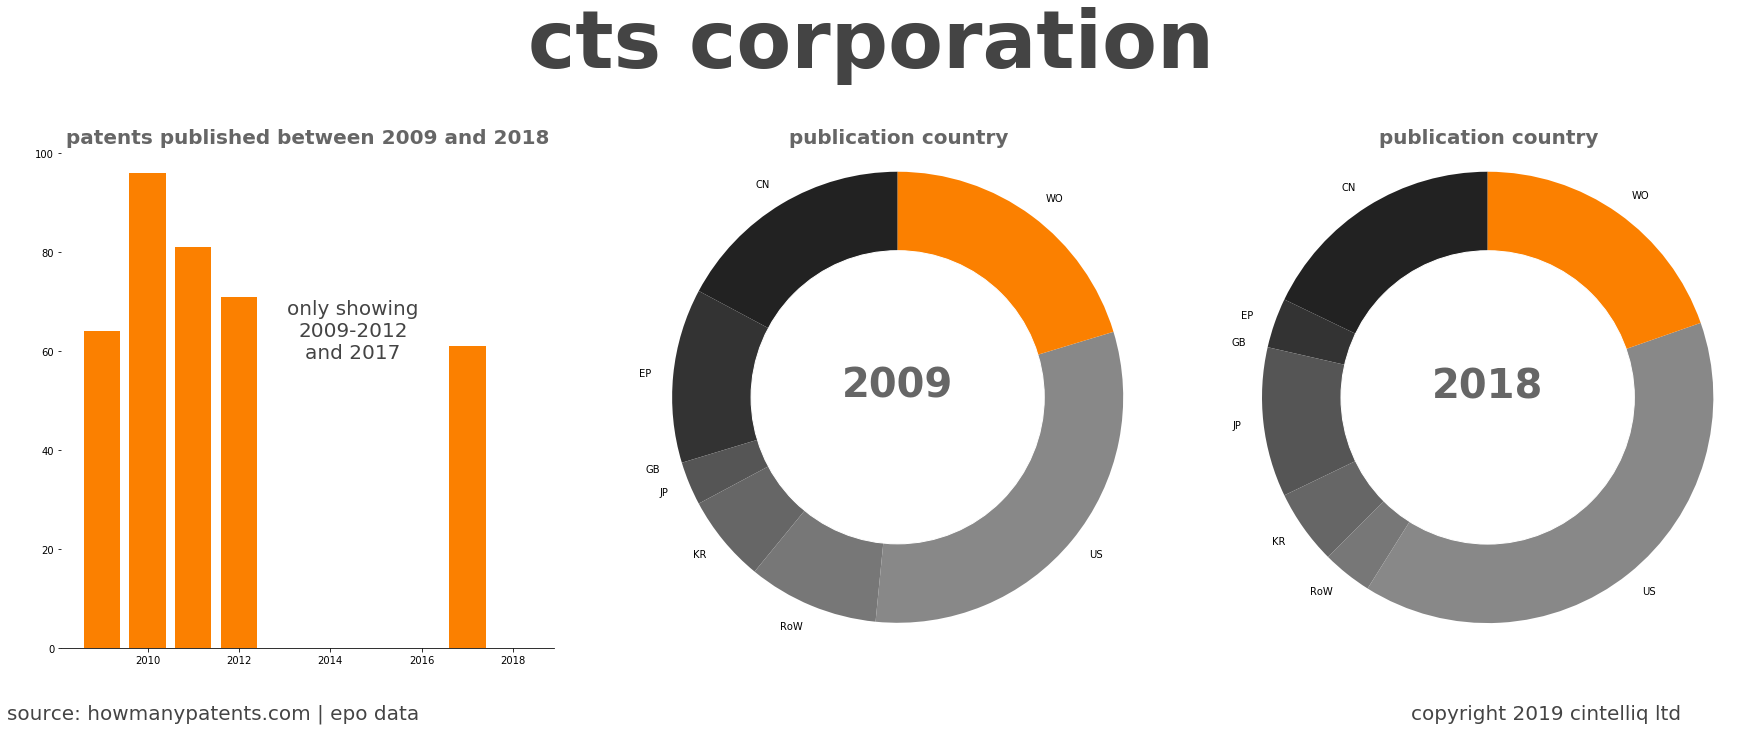 summary of patents for Cts Corporation